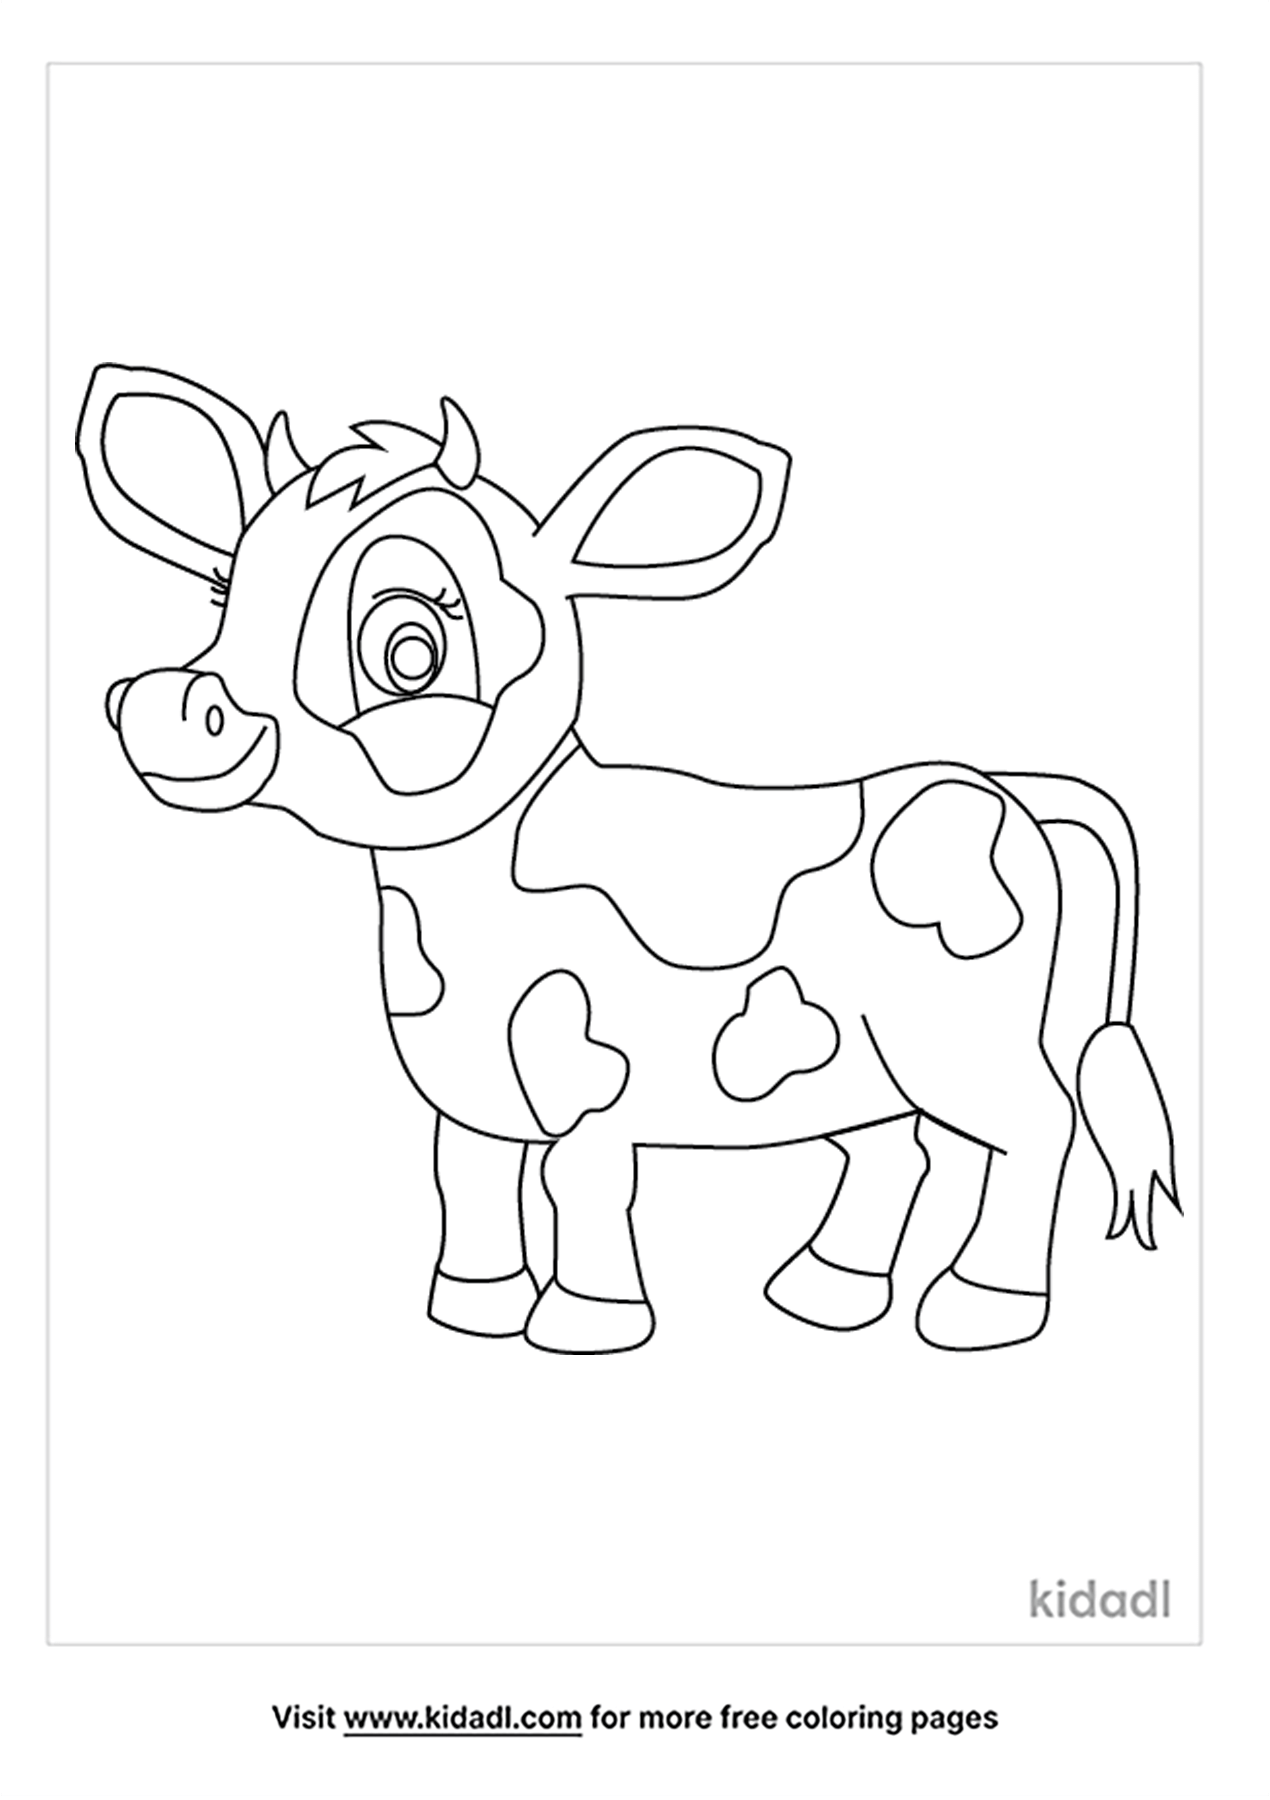 Baby Cow Coloring Pages | Free Animals Coloring Pages | Kidadl